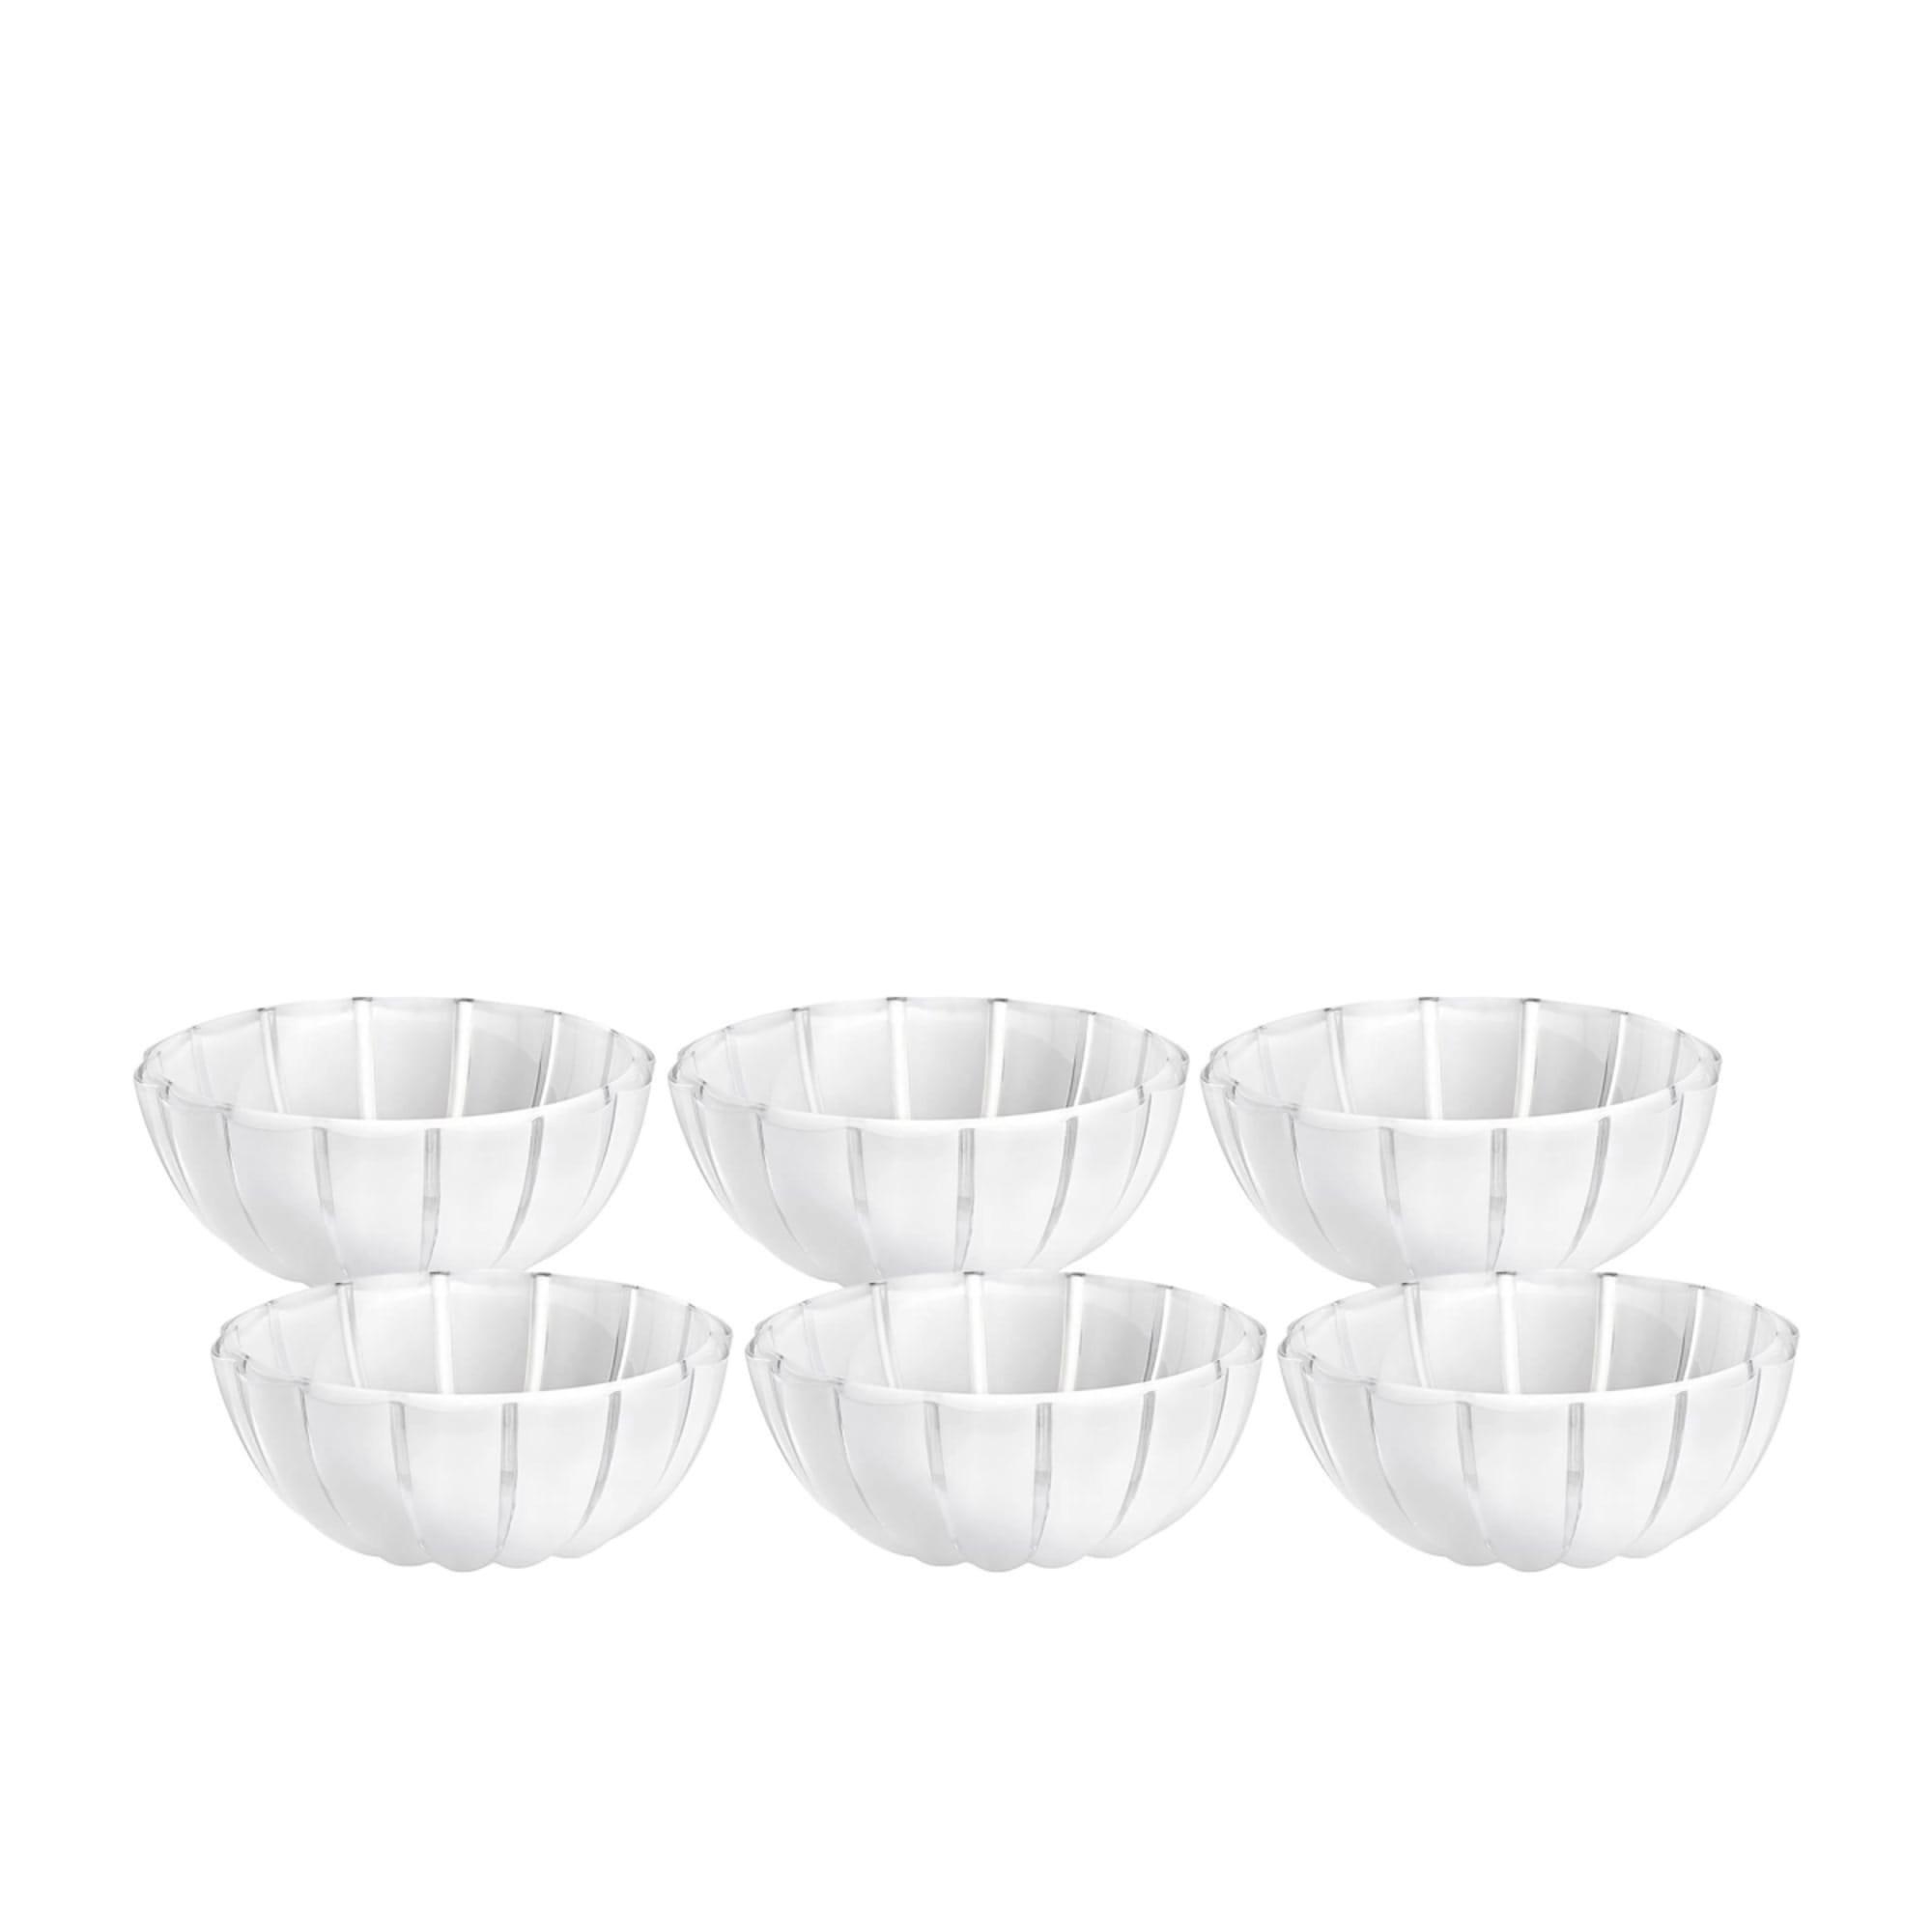 Guzzini Dolcevita Bowl Set of 6 Mother of Pearl Image 1